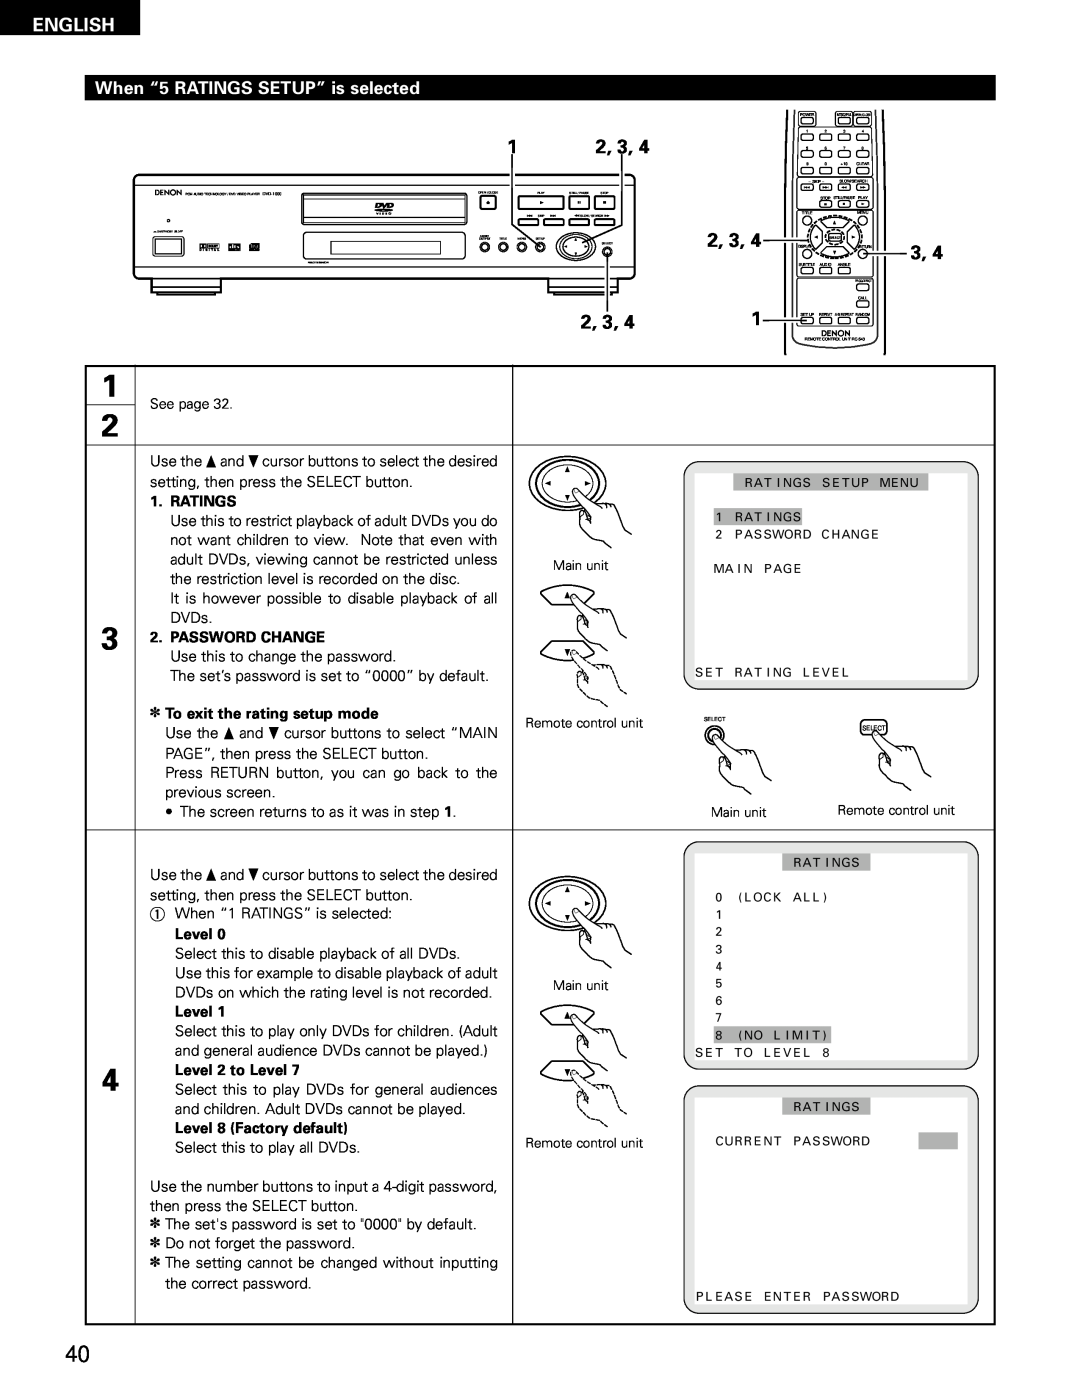 Denon DVD-1000 When “5 RATINGS SETUP” is selected, 2, 3, English, Ratings, Password Change, To exit the rating setup mode 